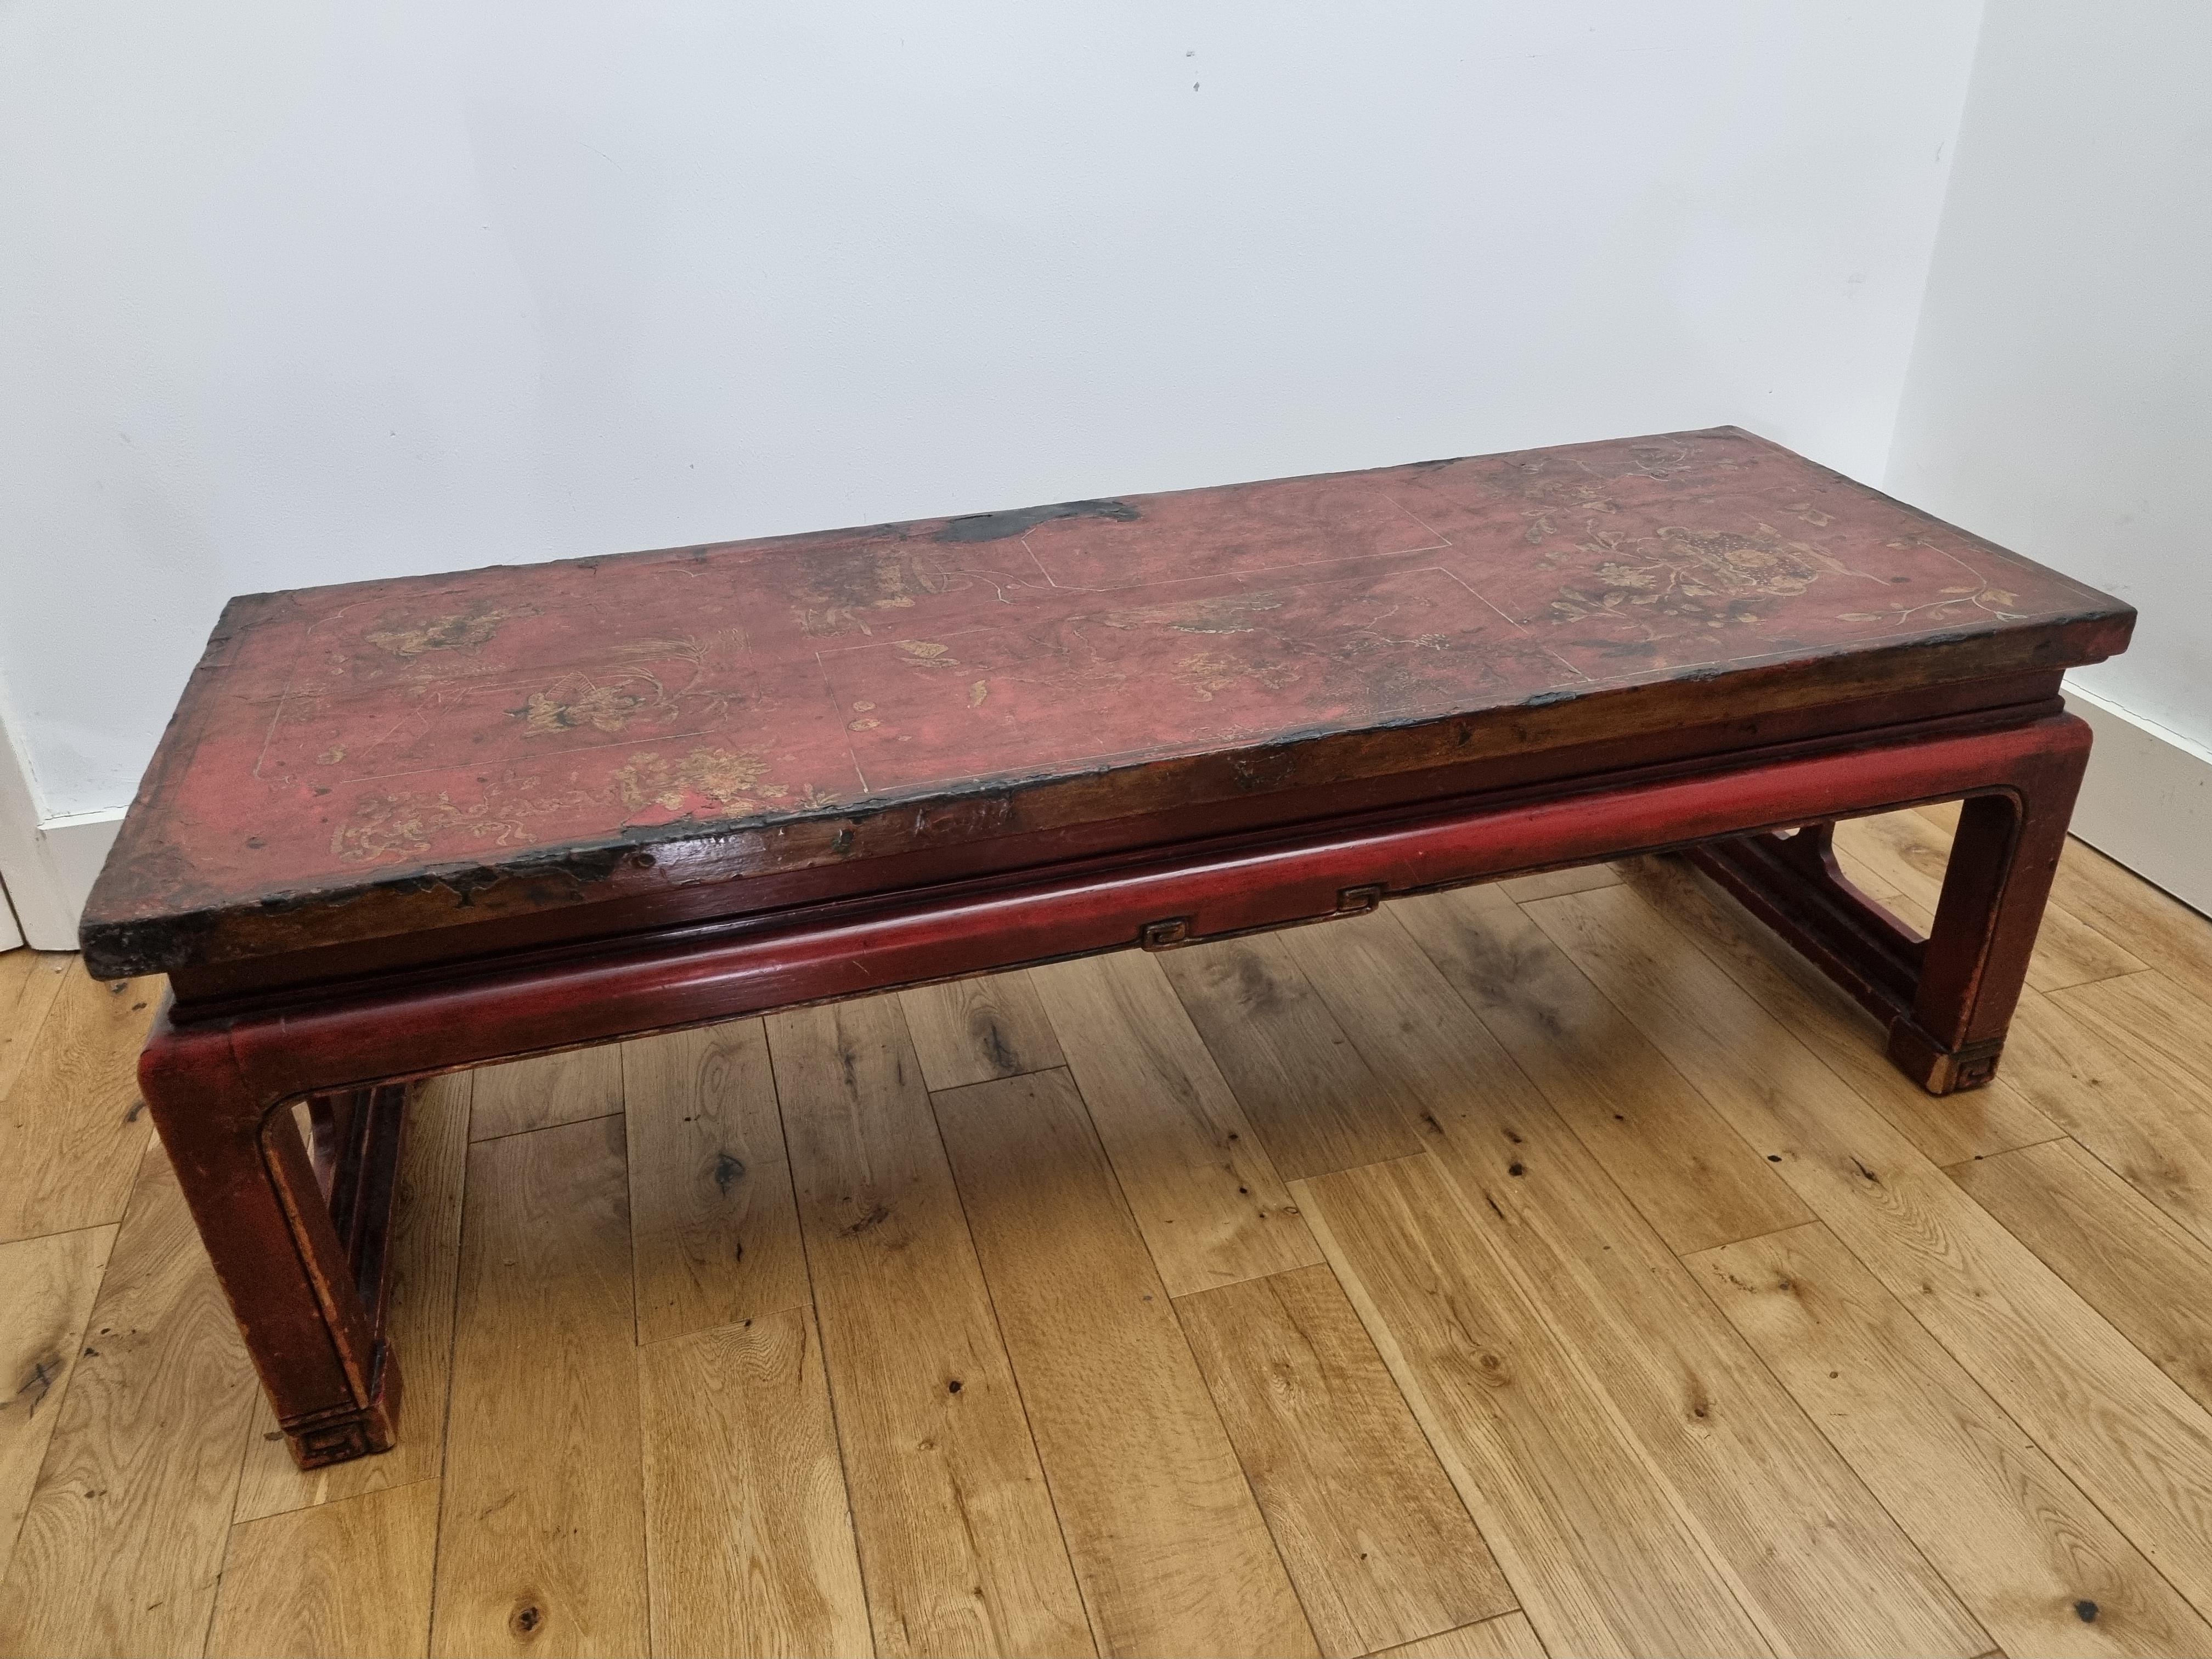 Late 19th Century 19th Century Red Lacquered Chinese Low Coffee Table from Shanxi Province For Sale